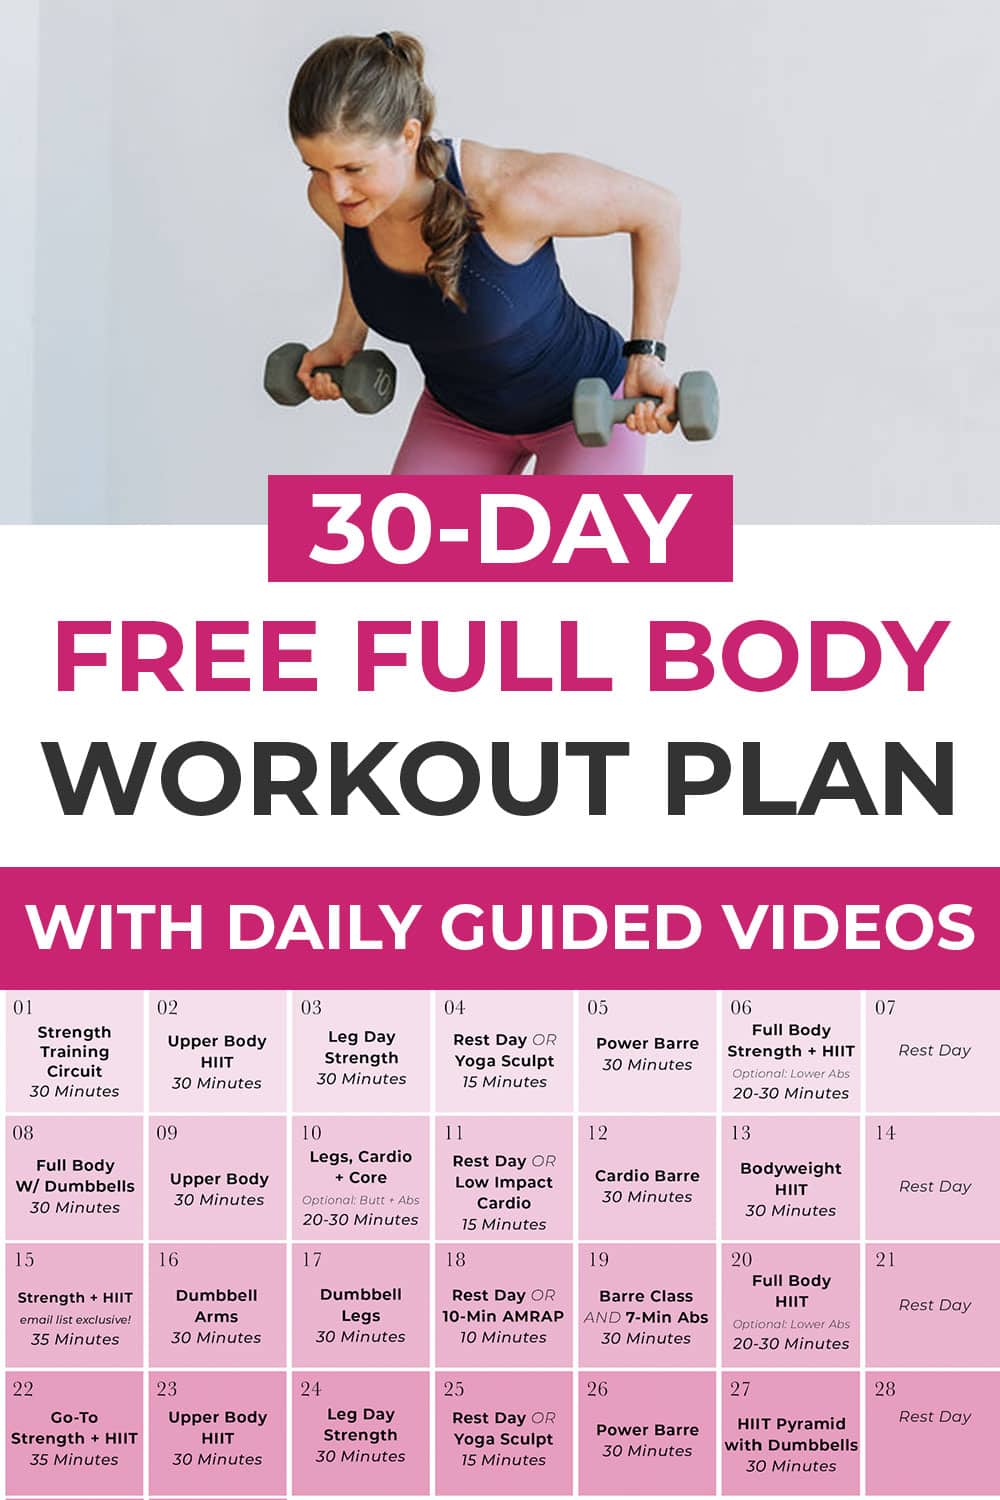 30-day-home-workout-plan-for-women-nourish-move-love